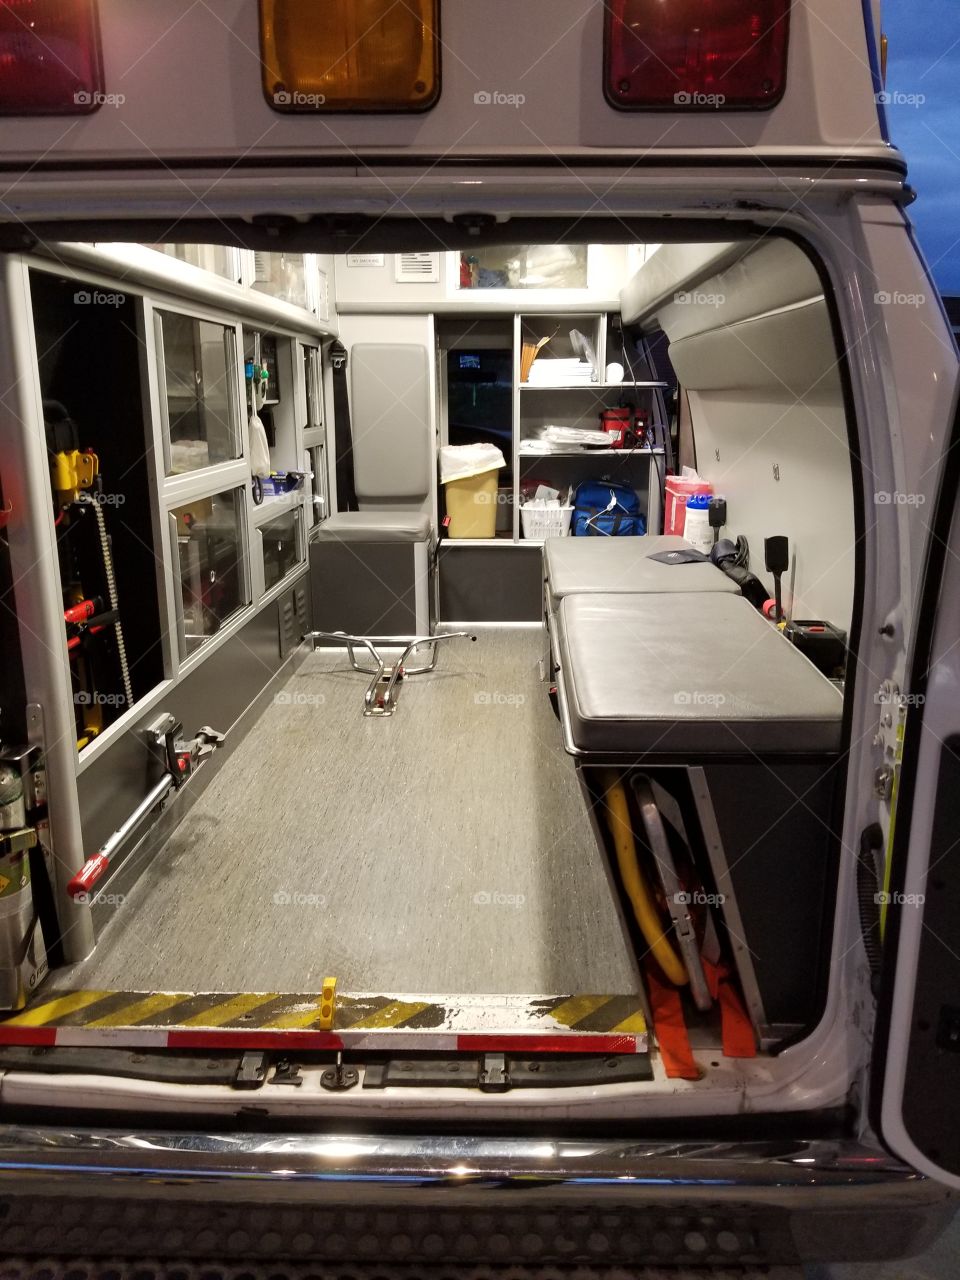 Cleaning up the back of the ambulance I work on!